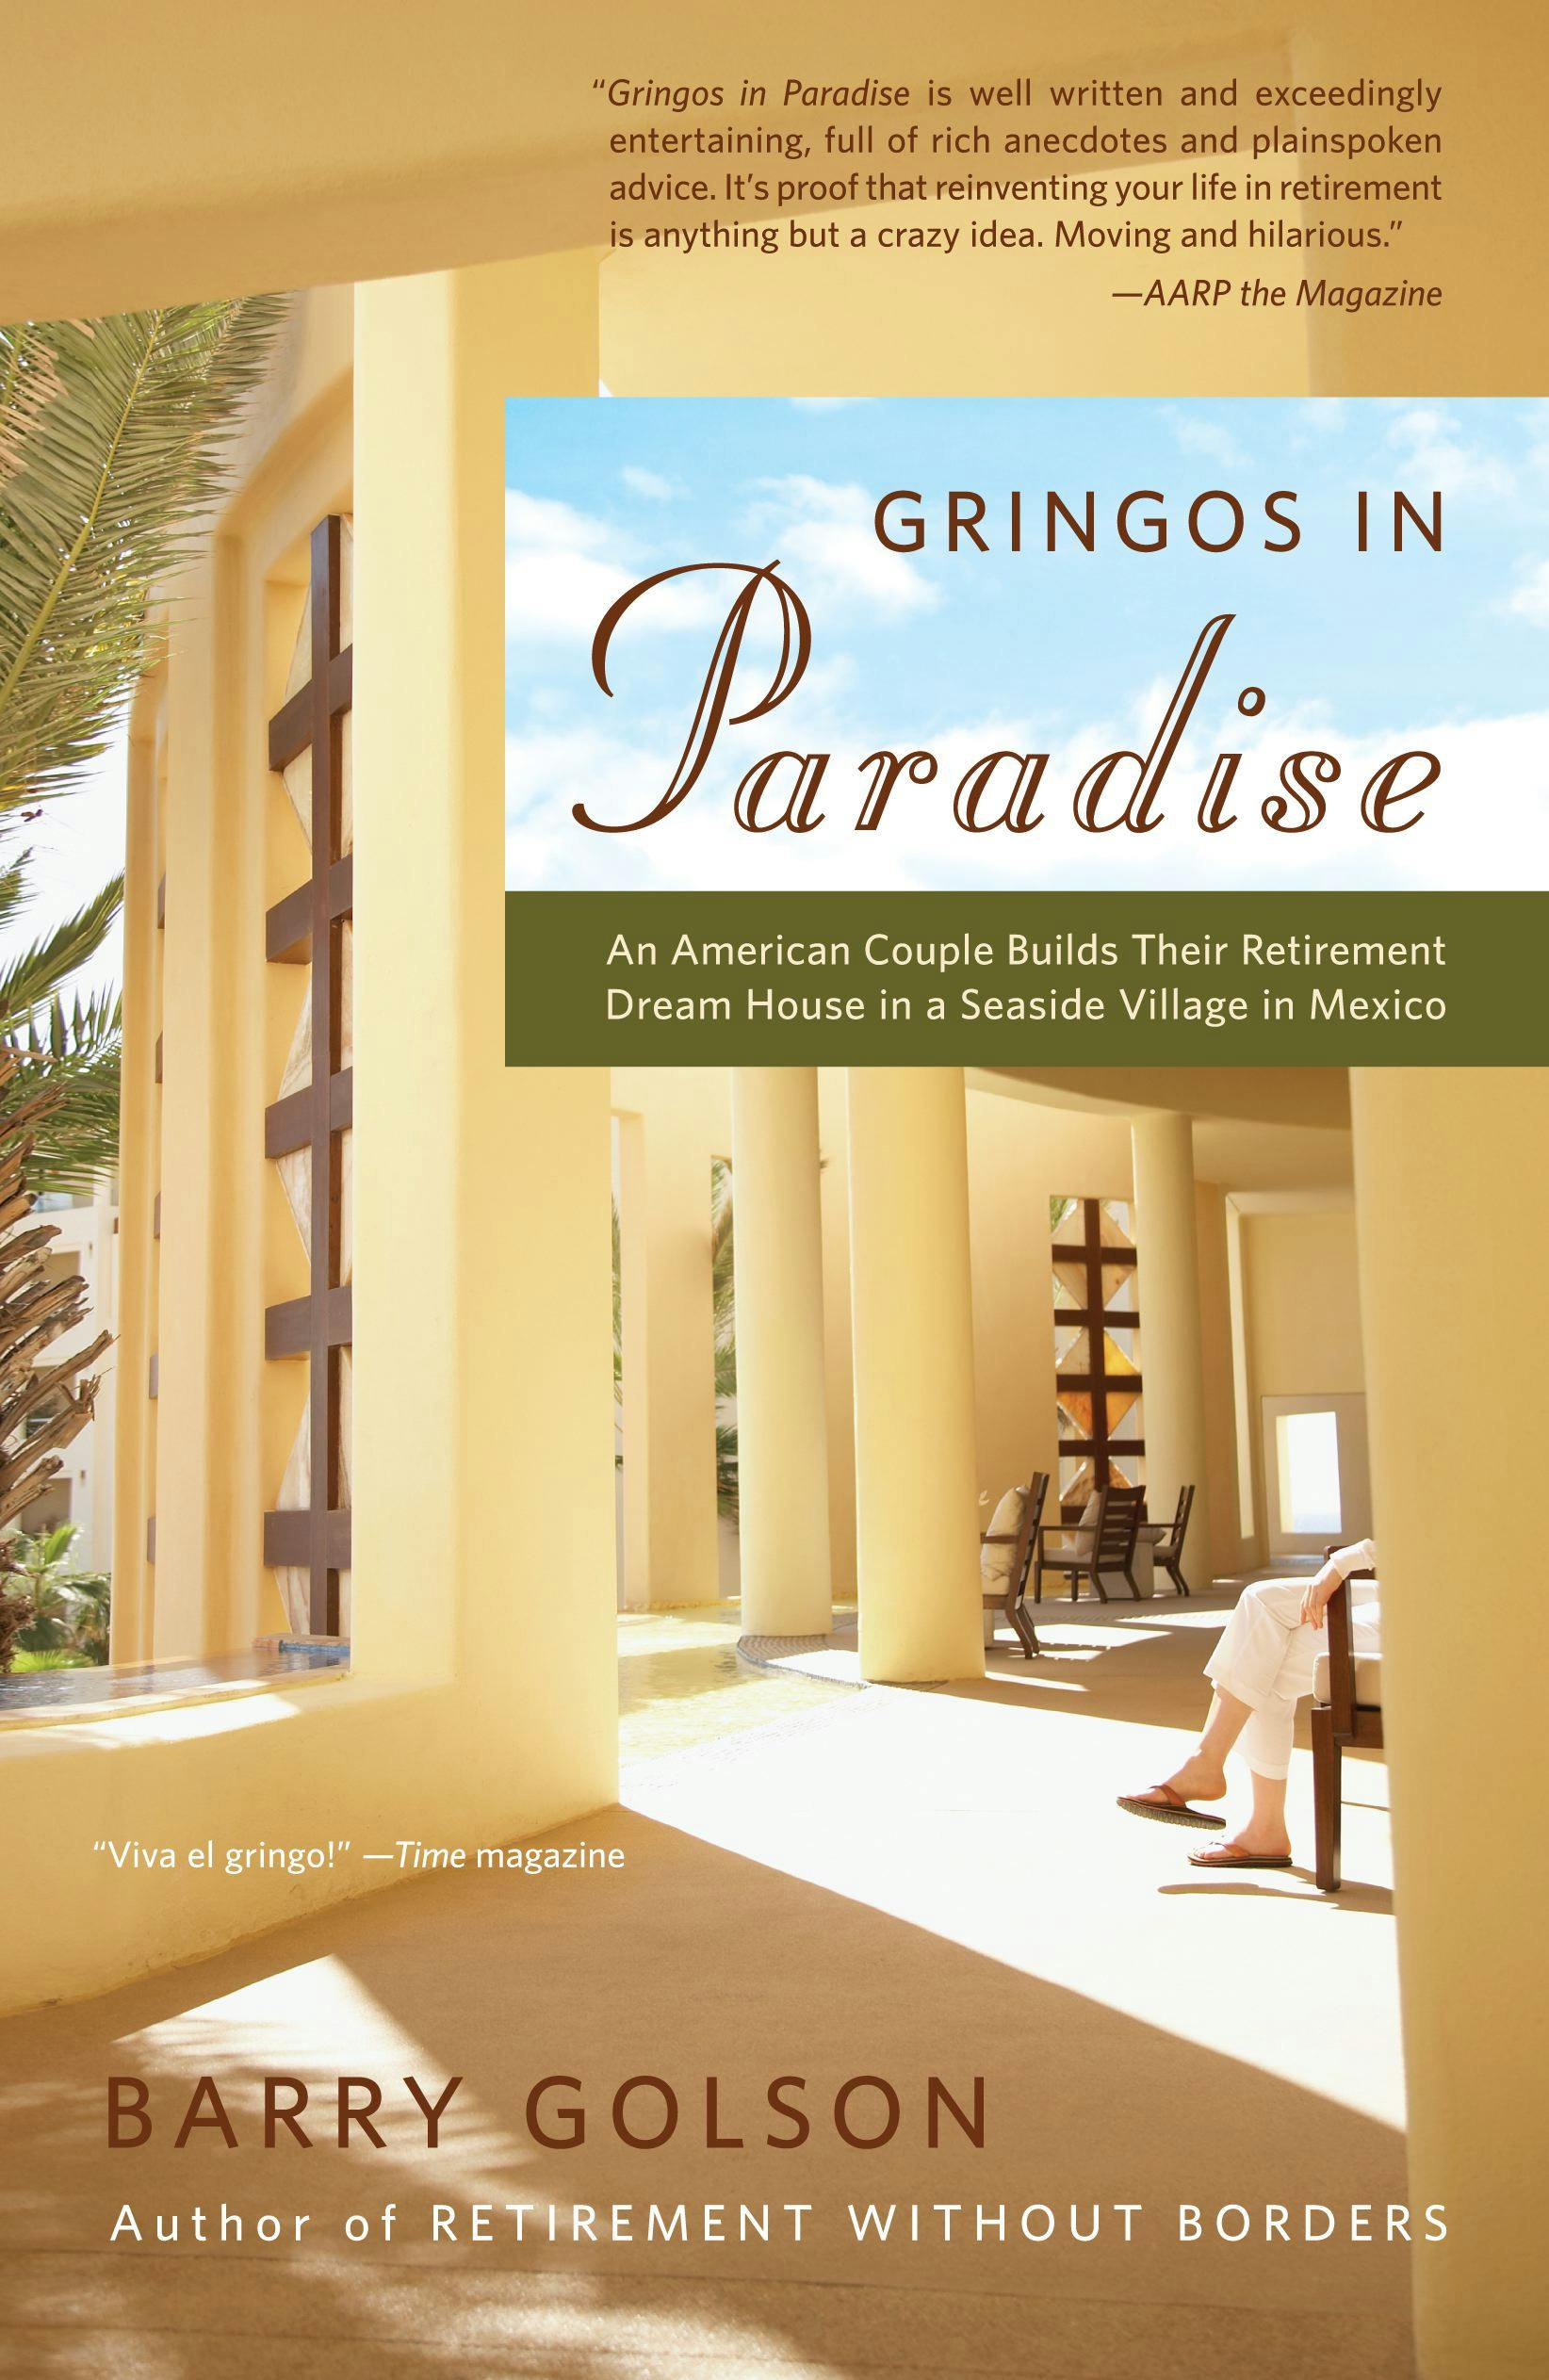 Gringos in Paradise: An American Couple Builds Their Retirement Dream House in a Seaside Village in Mexico - Barry Golson